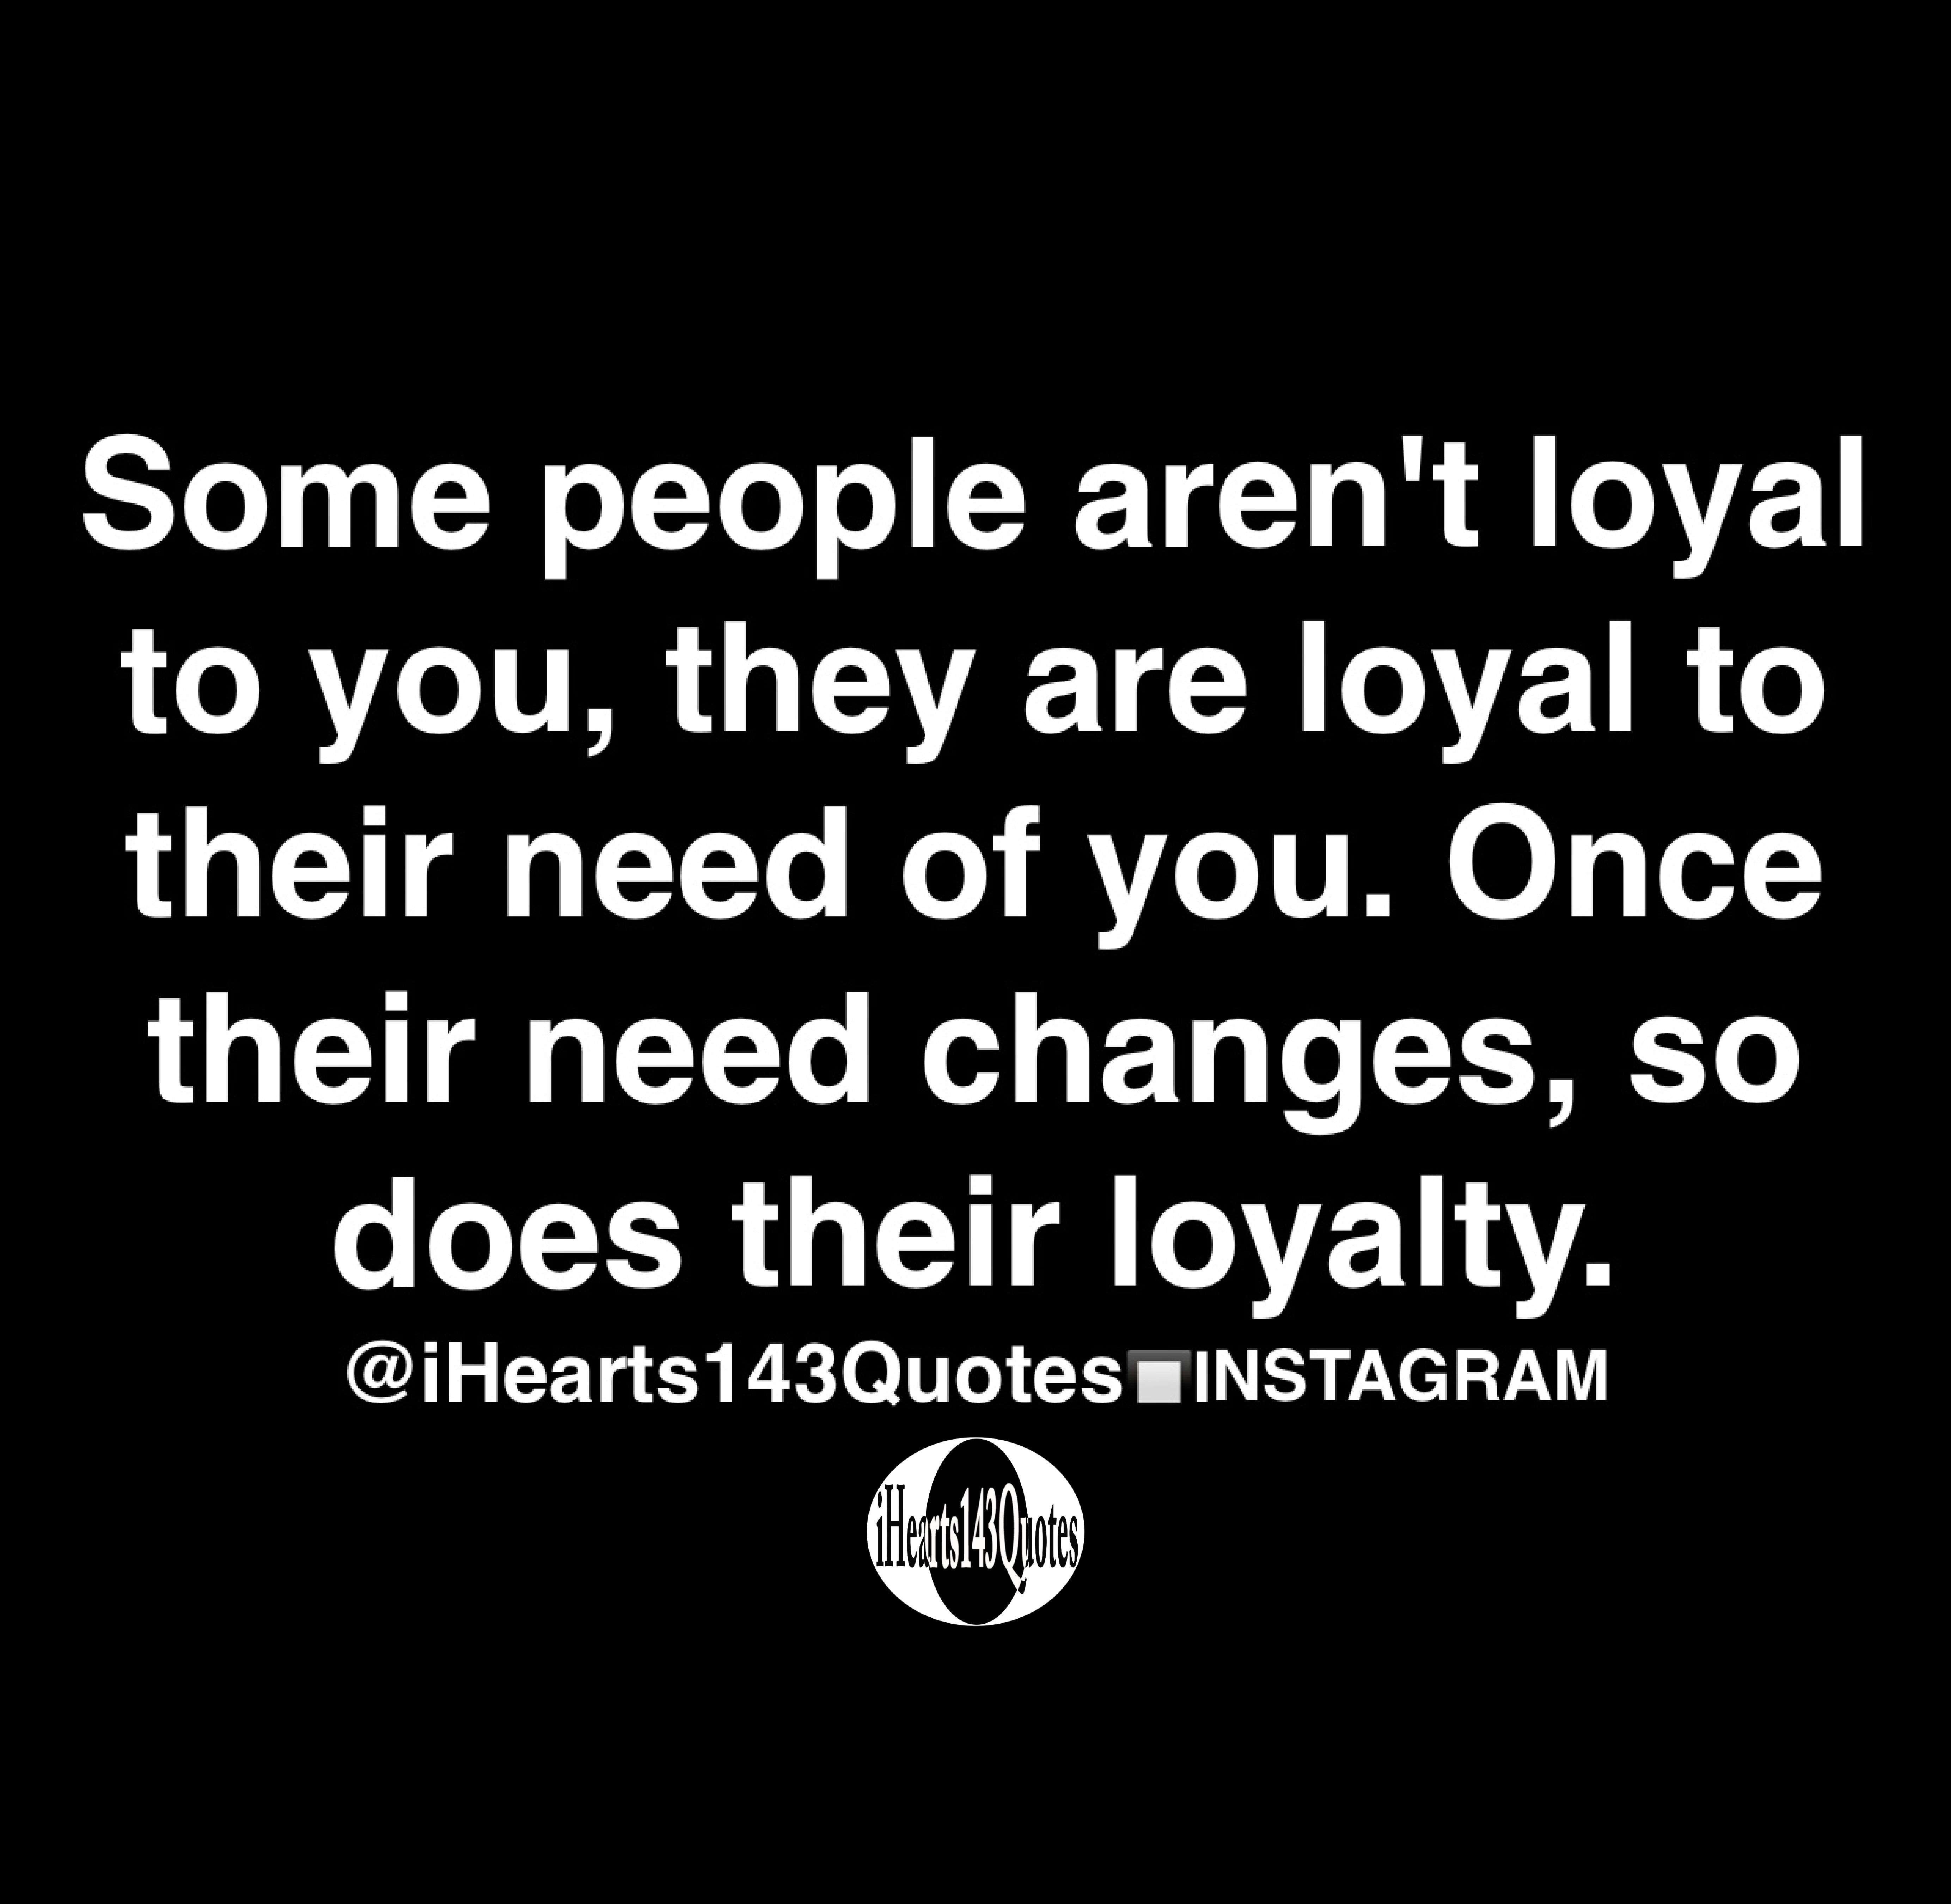 Some people aren't loyal to you, they are loyal to their need of you ...